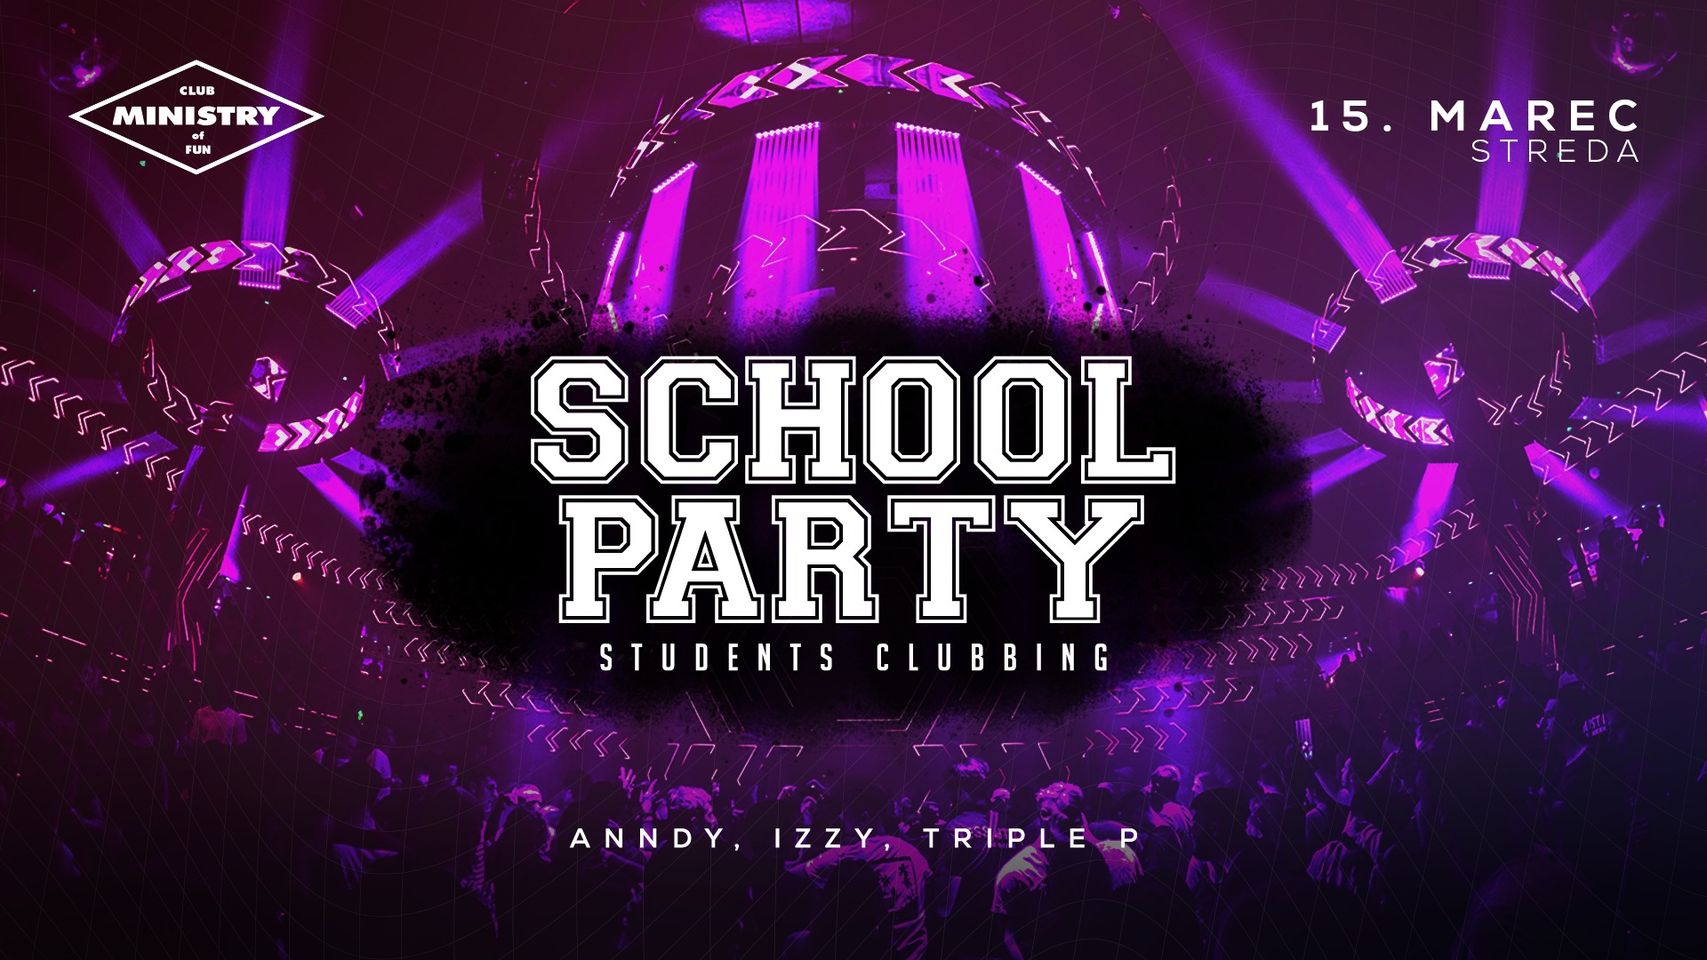 SCHOOL PARTY - Students Clubbing |  Ministry of Fun